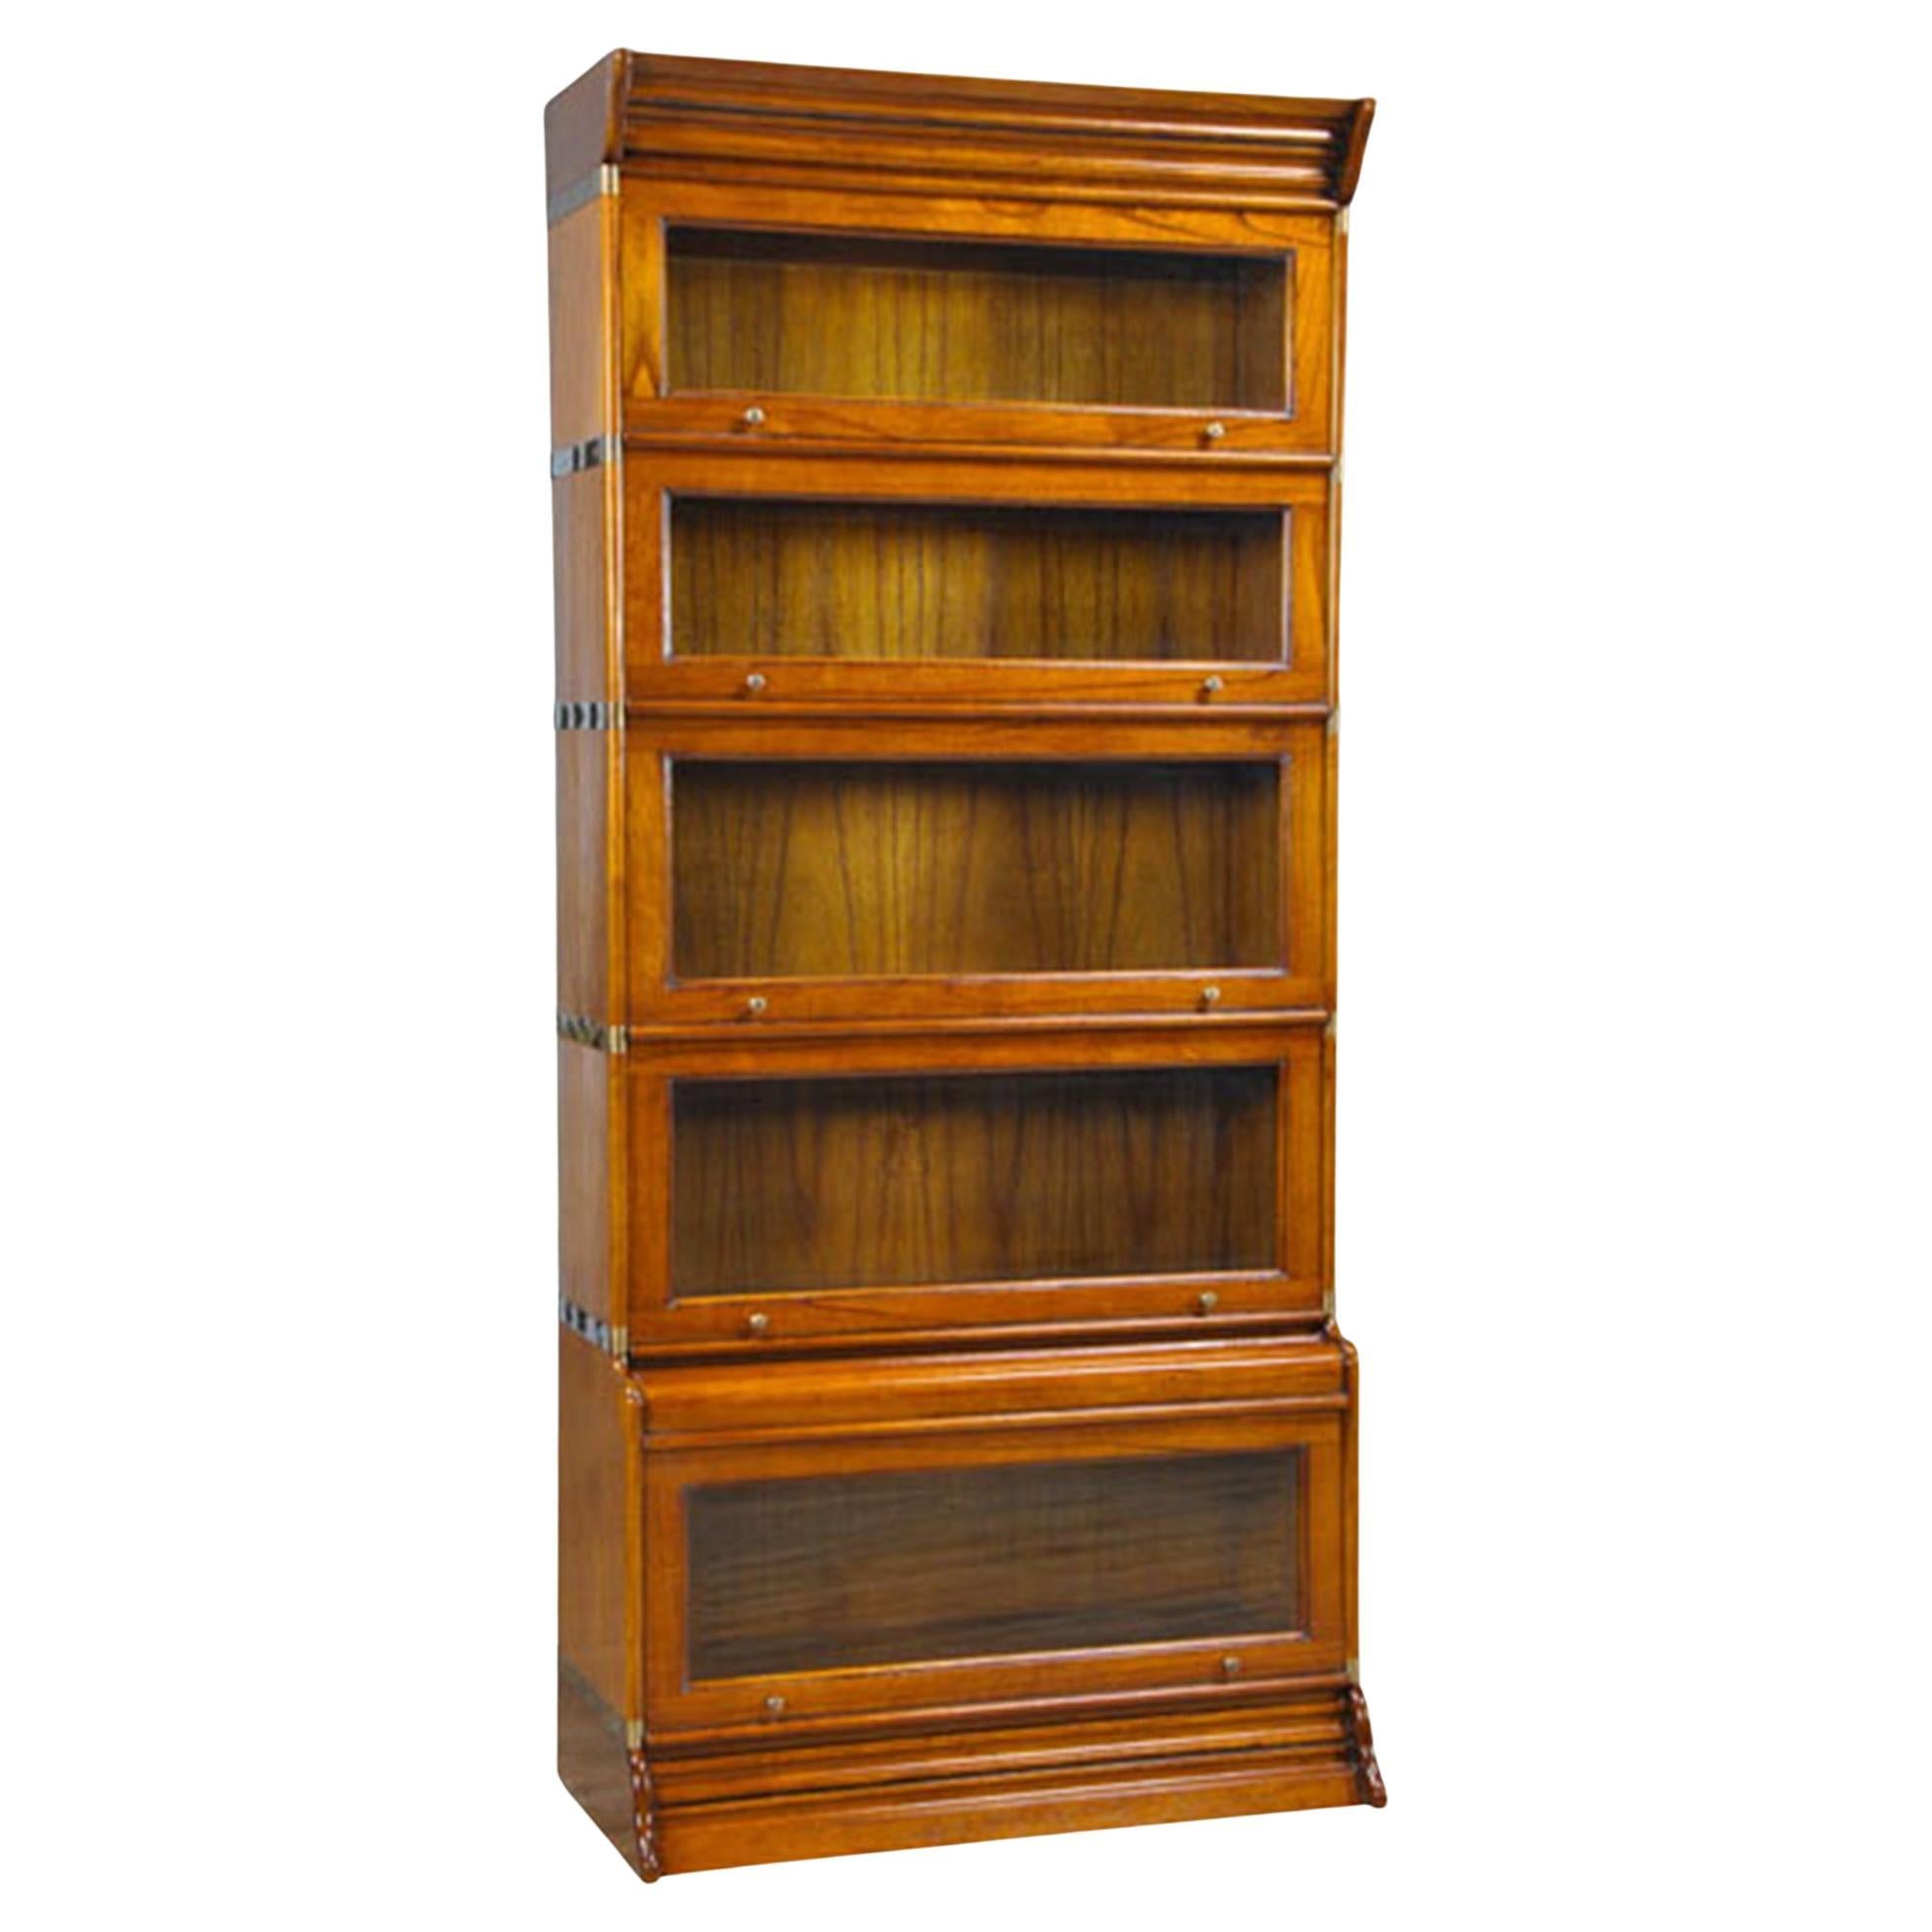 Stacking Bookcase For Sale